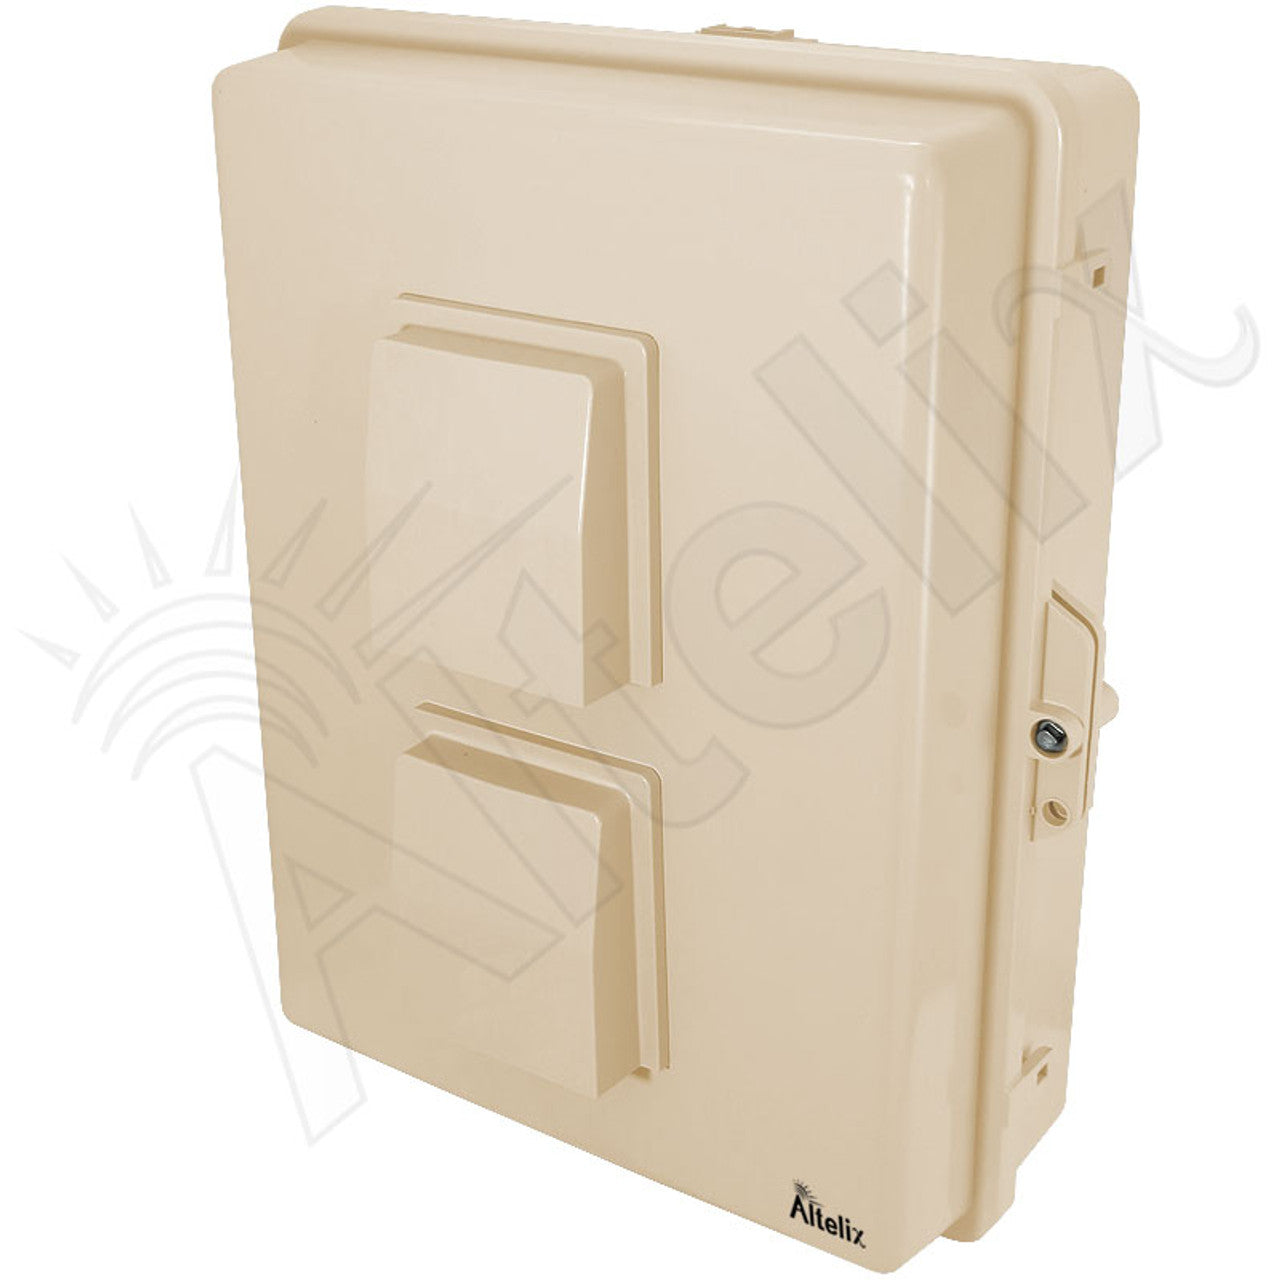 Altelix Vented Weatherproof Enclosure for TP-Link¬Æ AC1350 EAP225 V3 Access Point with 120VAC Outlets and Power Cord-5